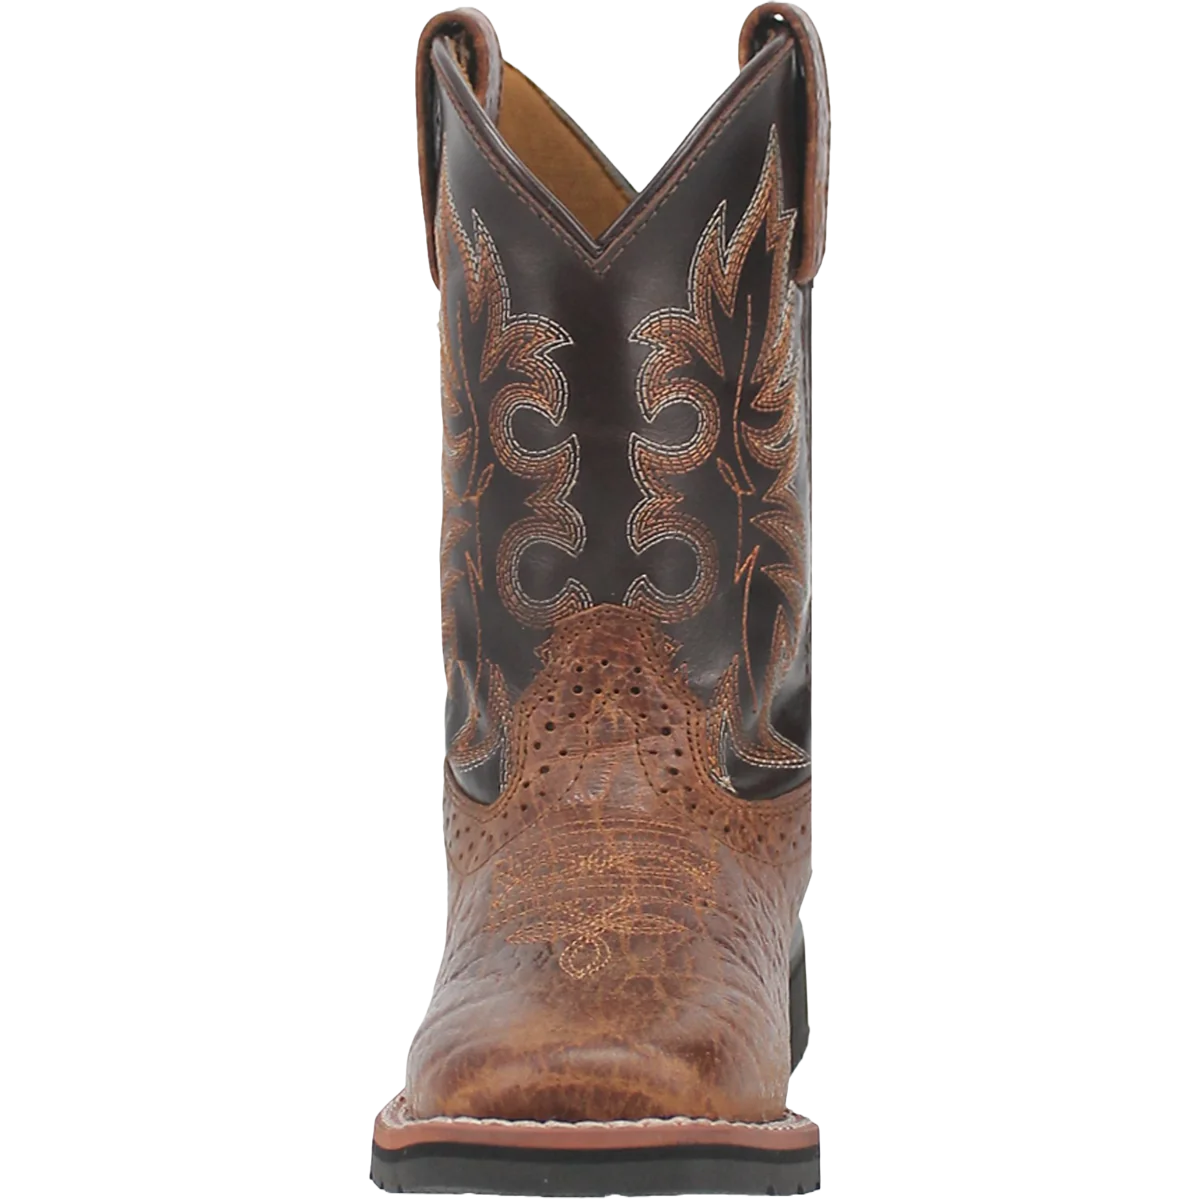 Load image into Gallery viewer, Dan Post Children&amp;#39;s Lil&amp;#39; Broken Bow Rust Western Boots DPC2986
